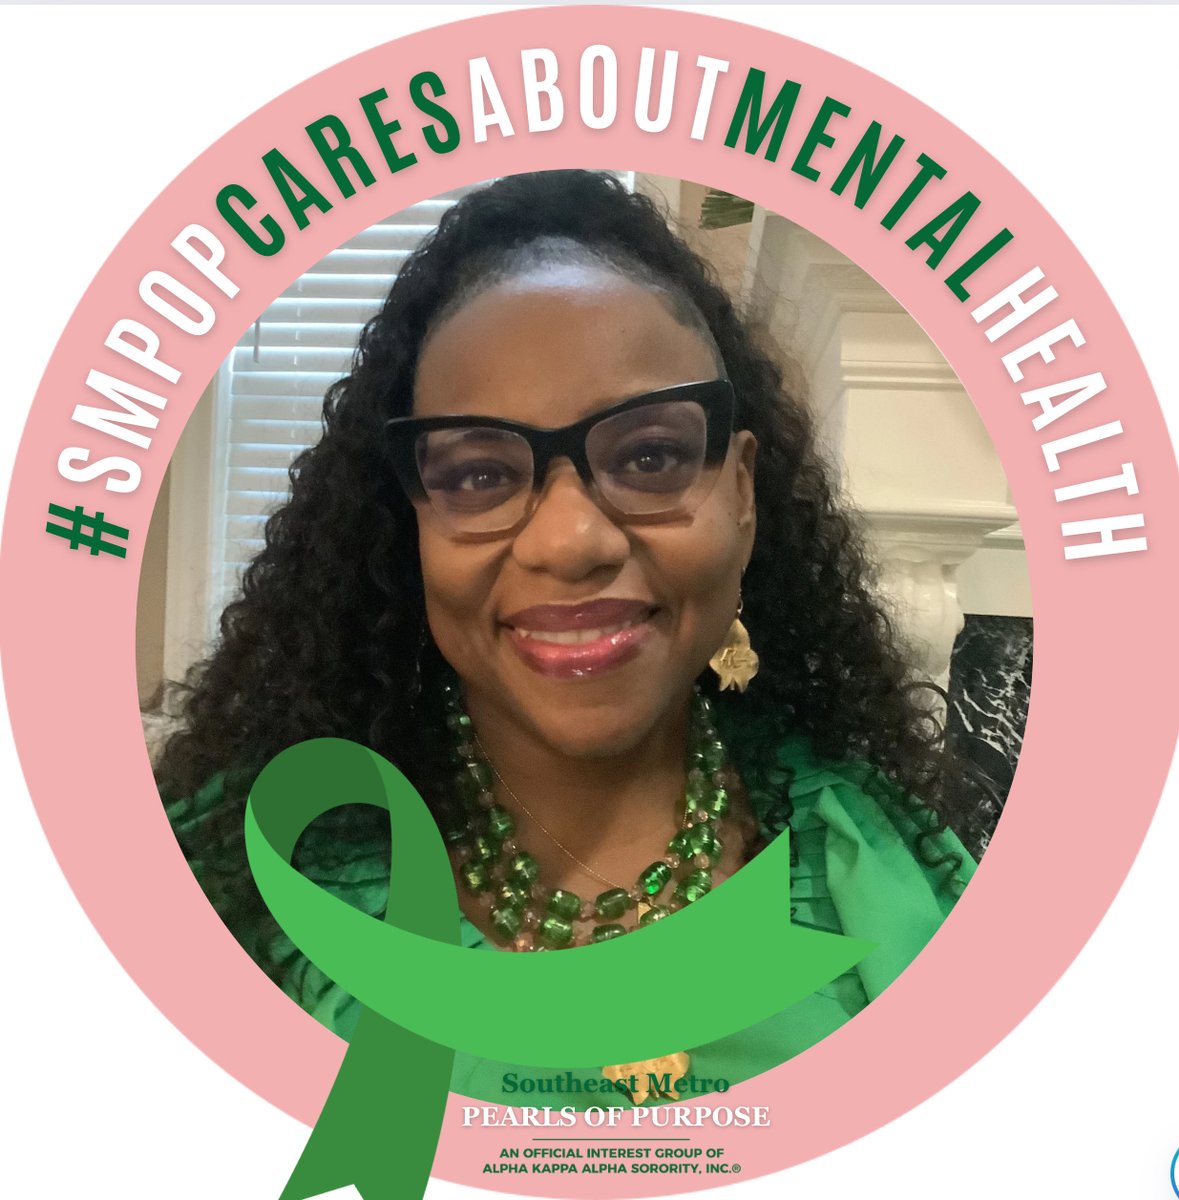 I care about Mental Health!💚 Mental Health is a serious matter! The Southeast Metro Pearls of Purpose are aware, breaking the silence and fostering a community of understanding and compassion!
#SMPOPCaresAboutMentalHealth #wepop
#AKA1908 #TUNEinSAR #SMPOPserves #Henrycares